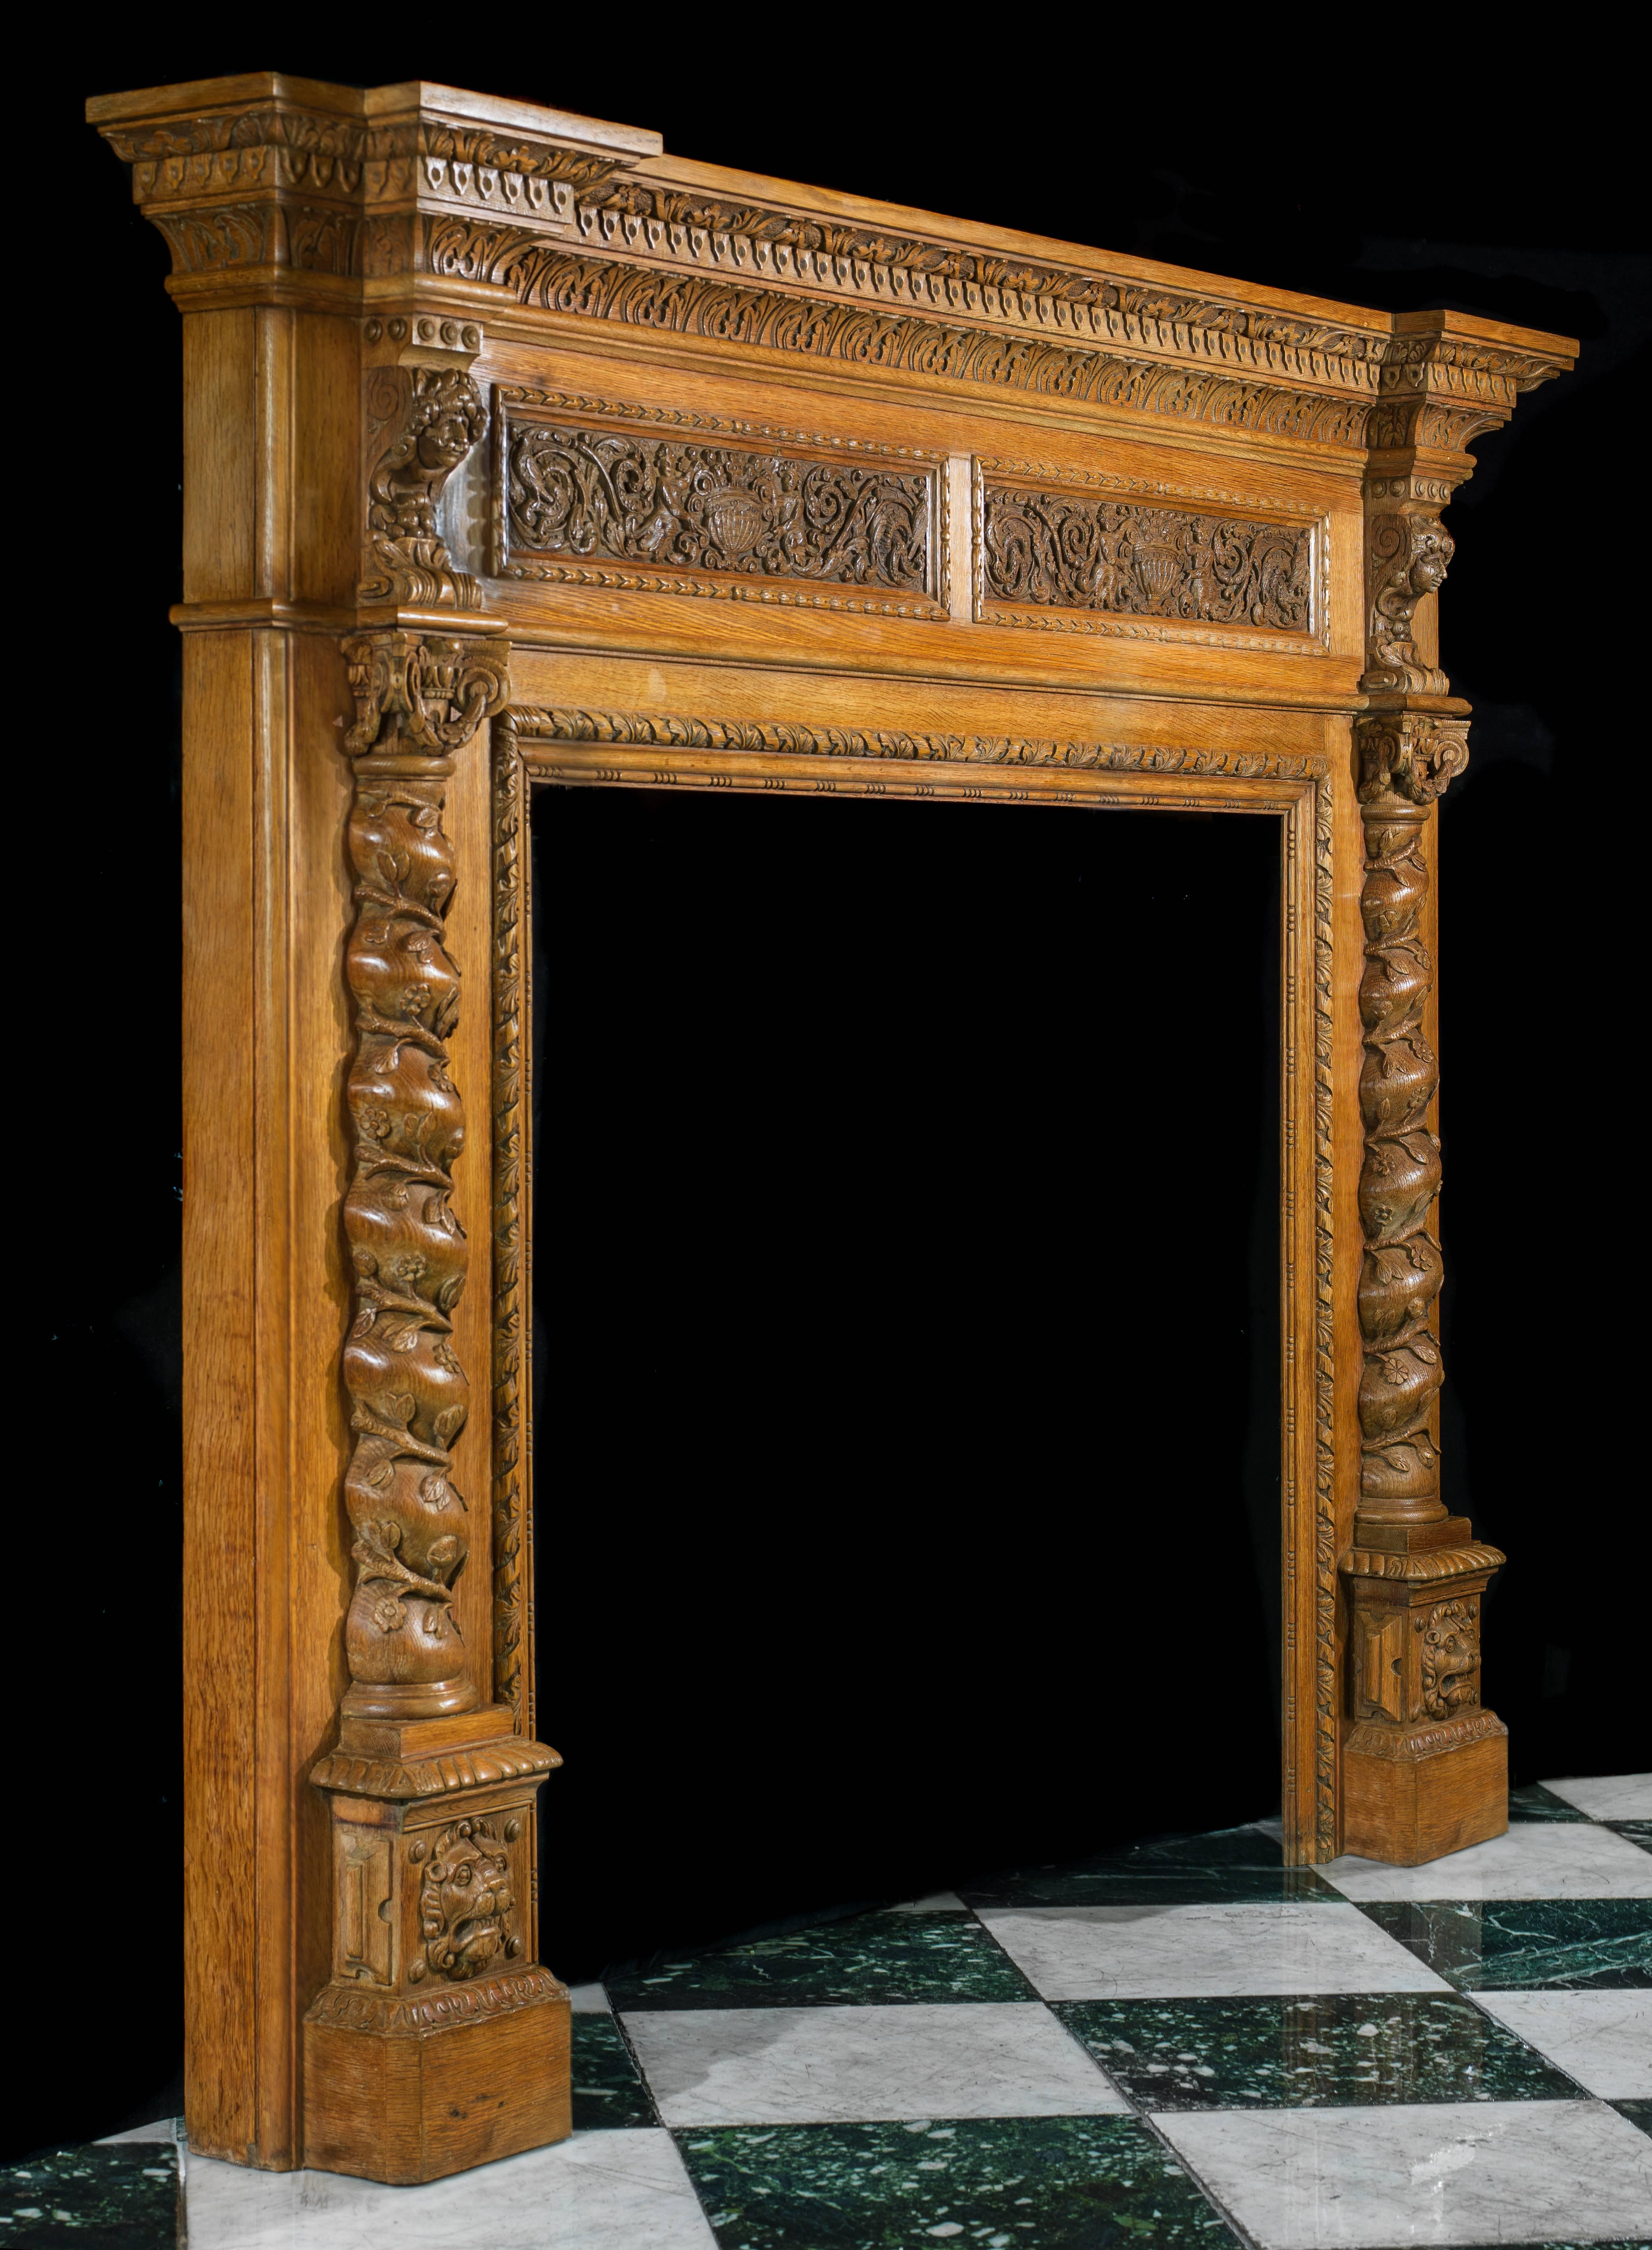 A large carved oak fireplace surround in the Italian Renaissance manner. The breakfront shelf with carved decoration over the frieze inset with twin carved panels of putti holding urns amidst scrolled ornament. The figural endblocks are supported on